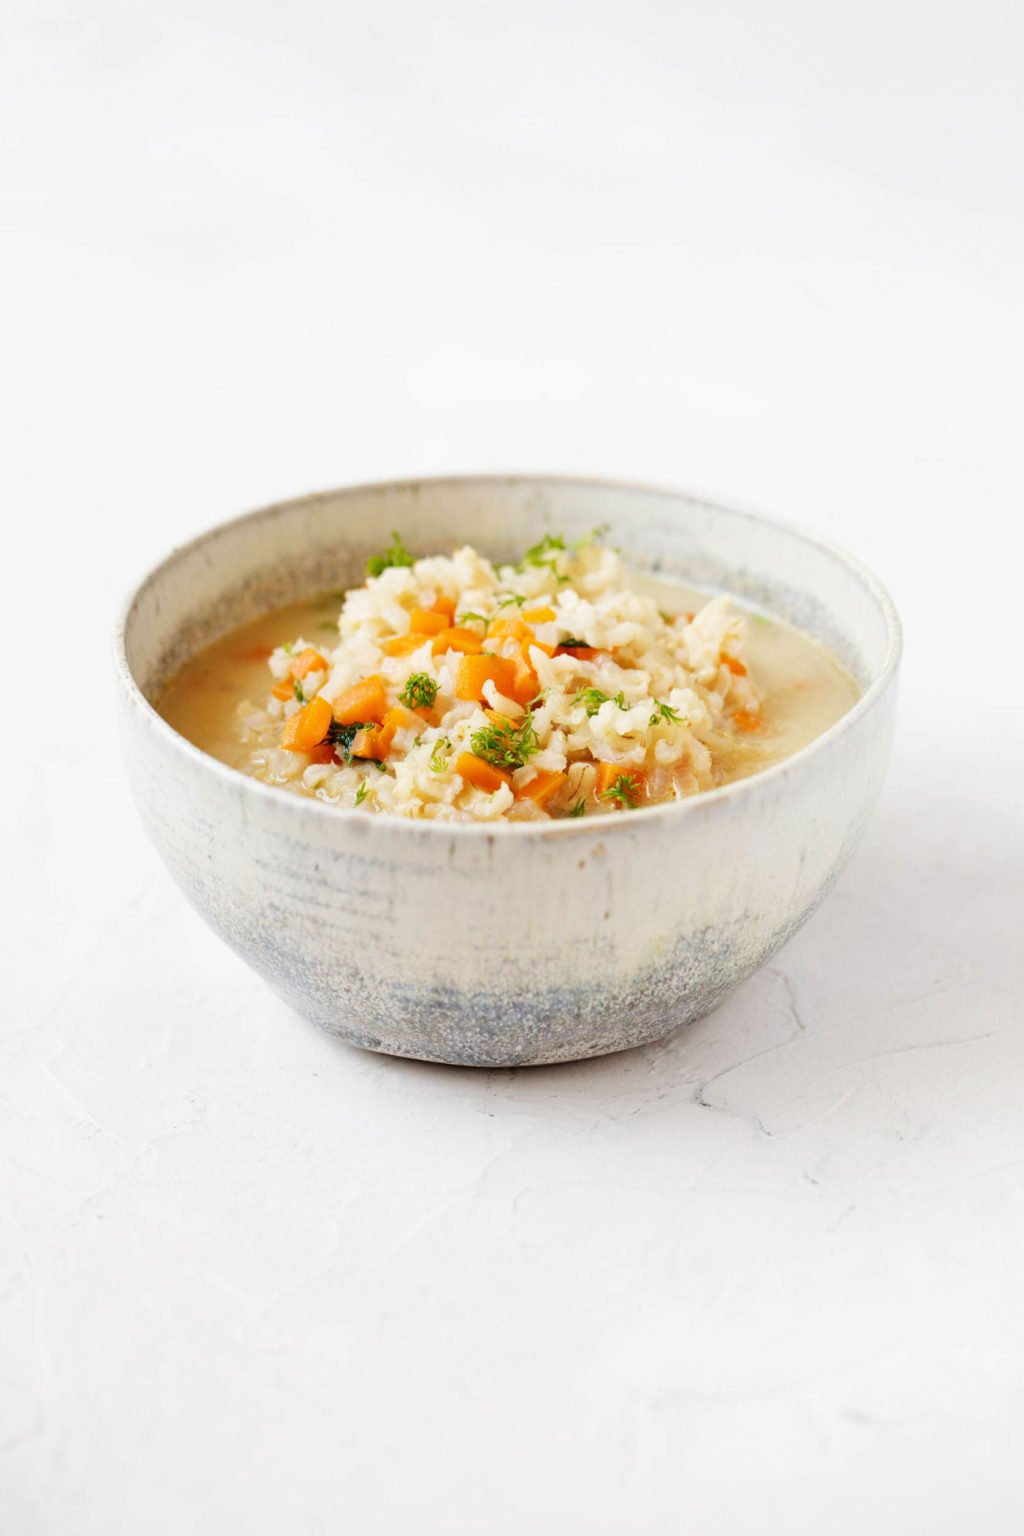 An angled photo of a ceramic bowl, filled with rice, broth, and vegetables. It rests on a white surface.